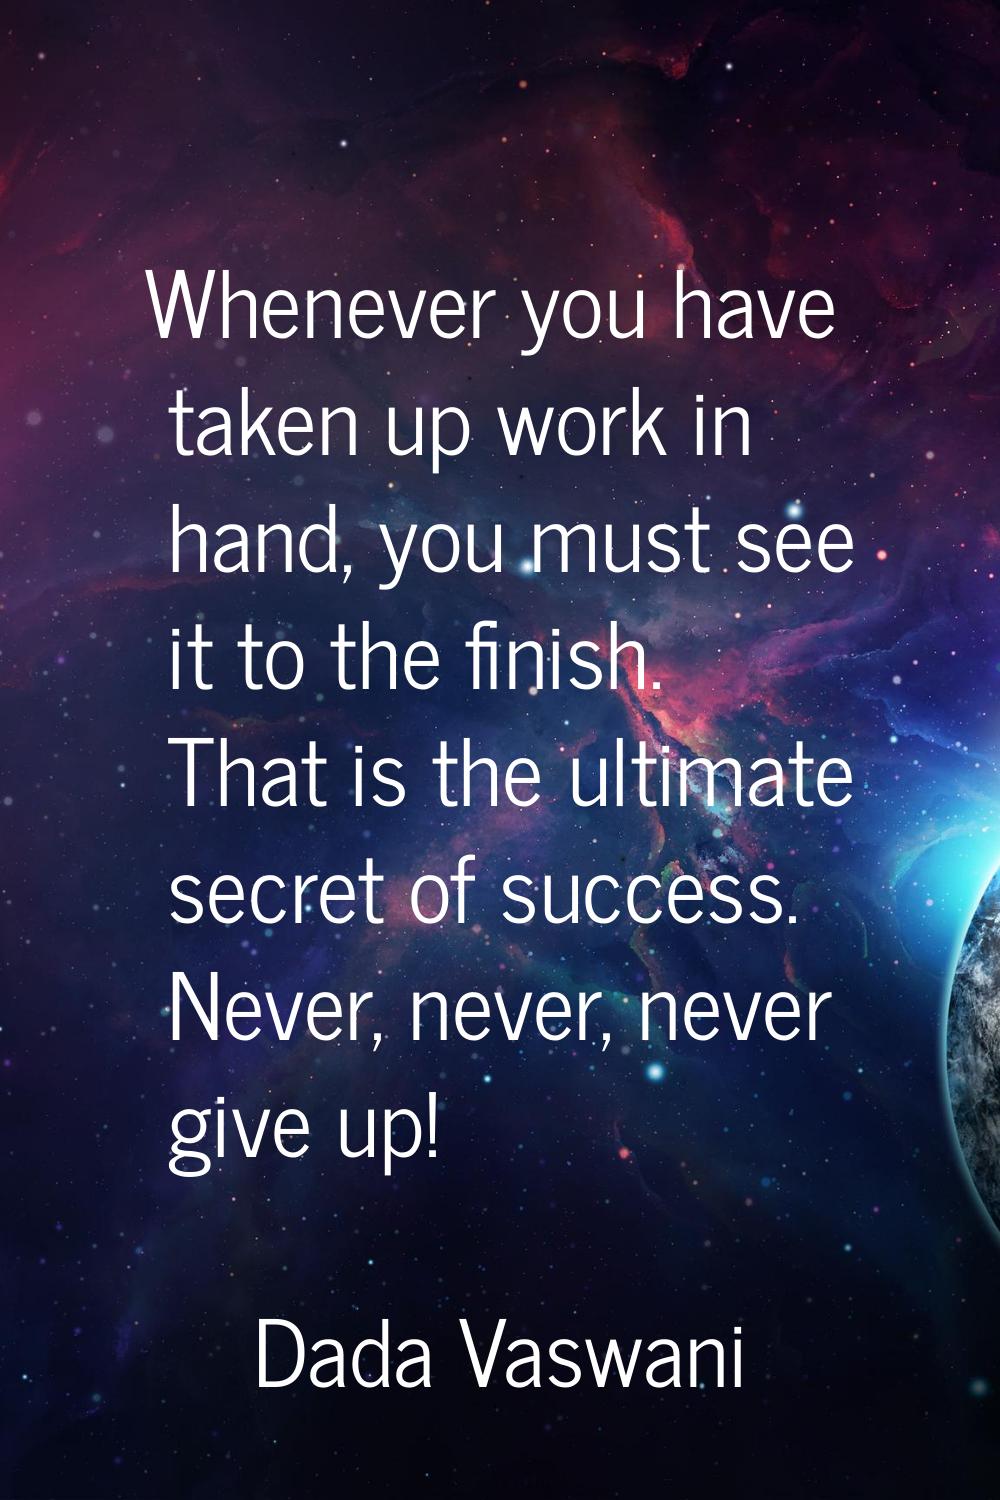 Whenever you have taken up work in hand, you must see it to the finish. That is the ultimate secret